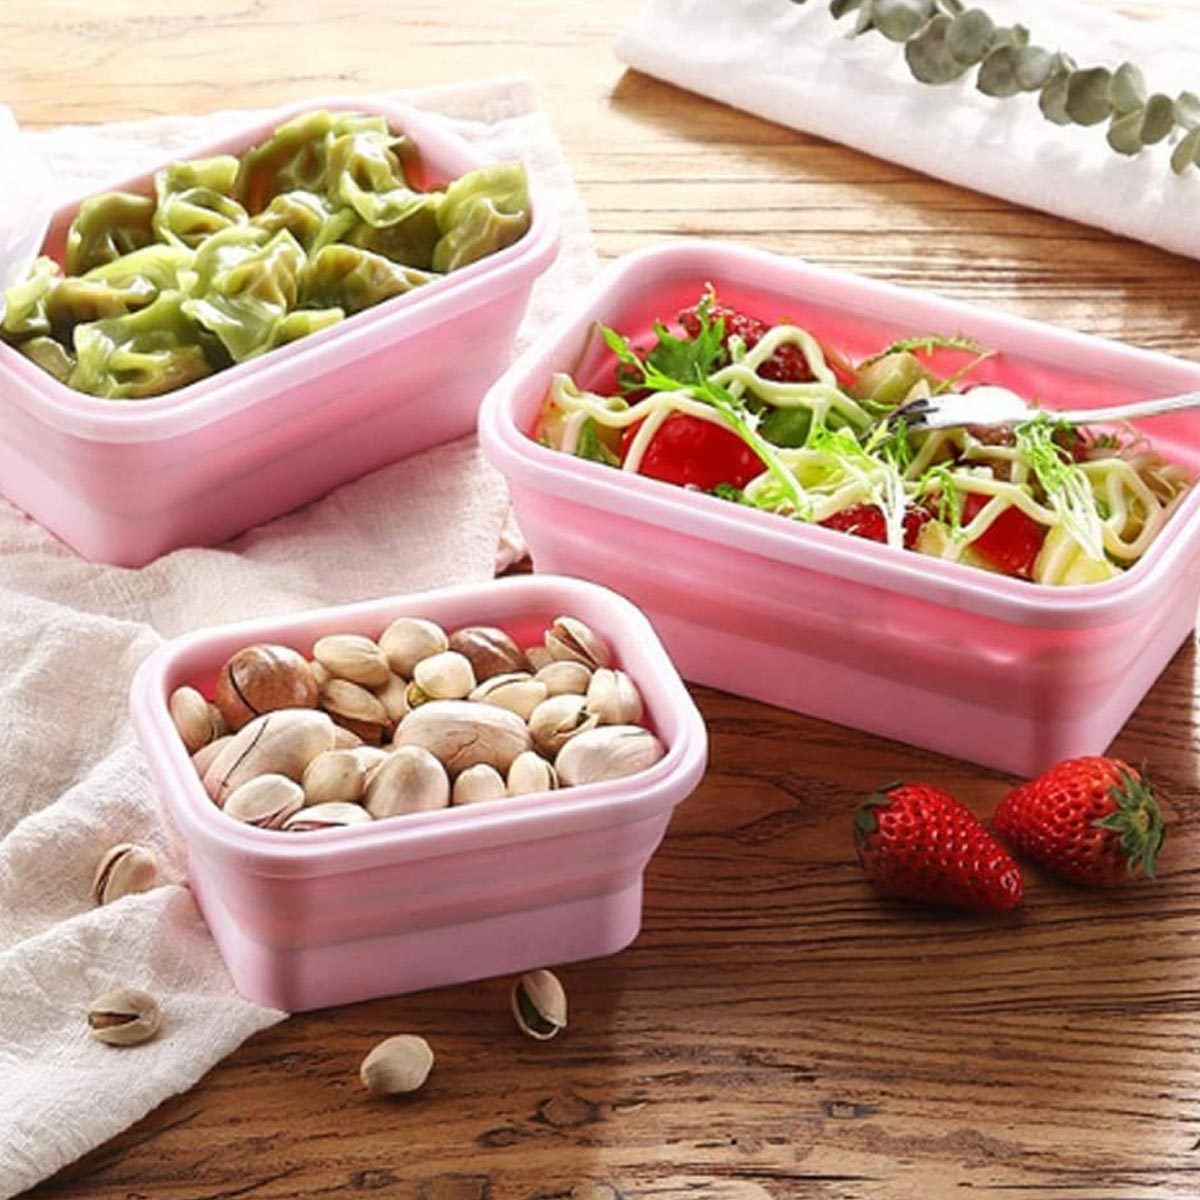 Silicone Folding Lunch Box with Lid Foldable Fruit Salad Bowl Food Storage  Containers Container Lunch Box Kitchen Tool